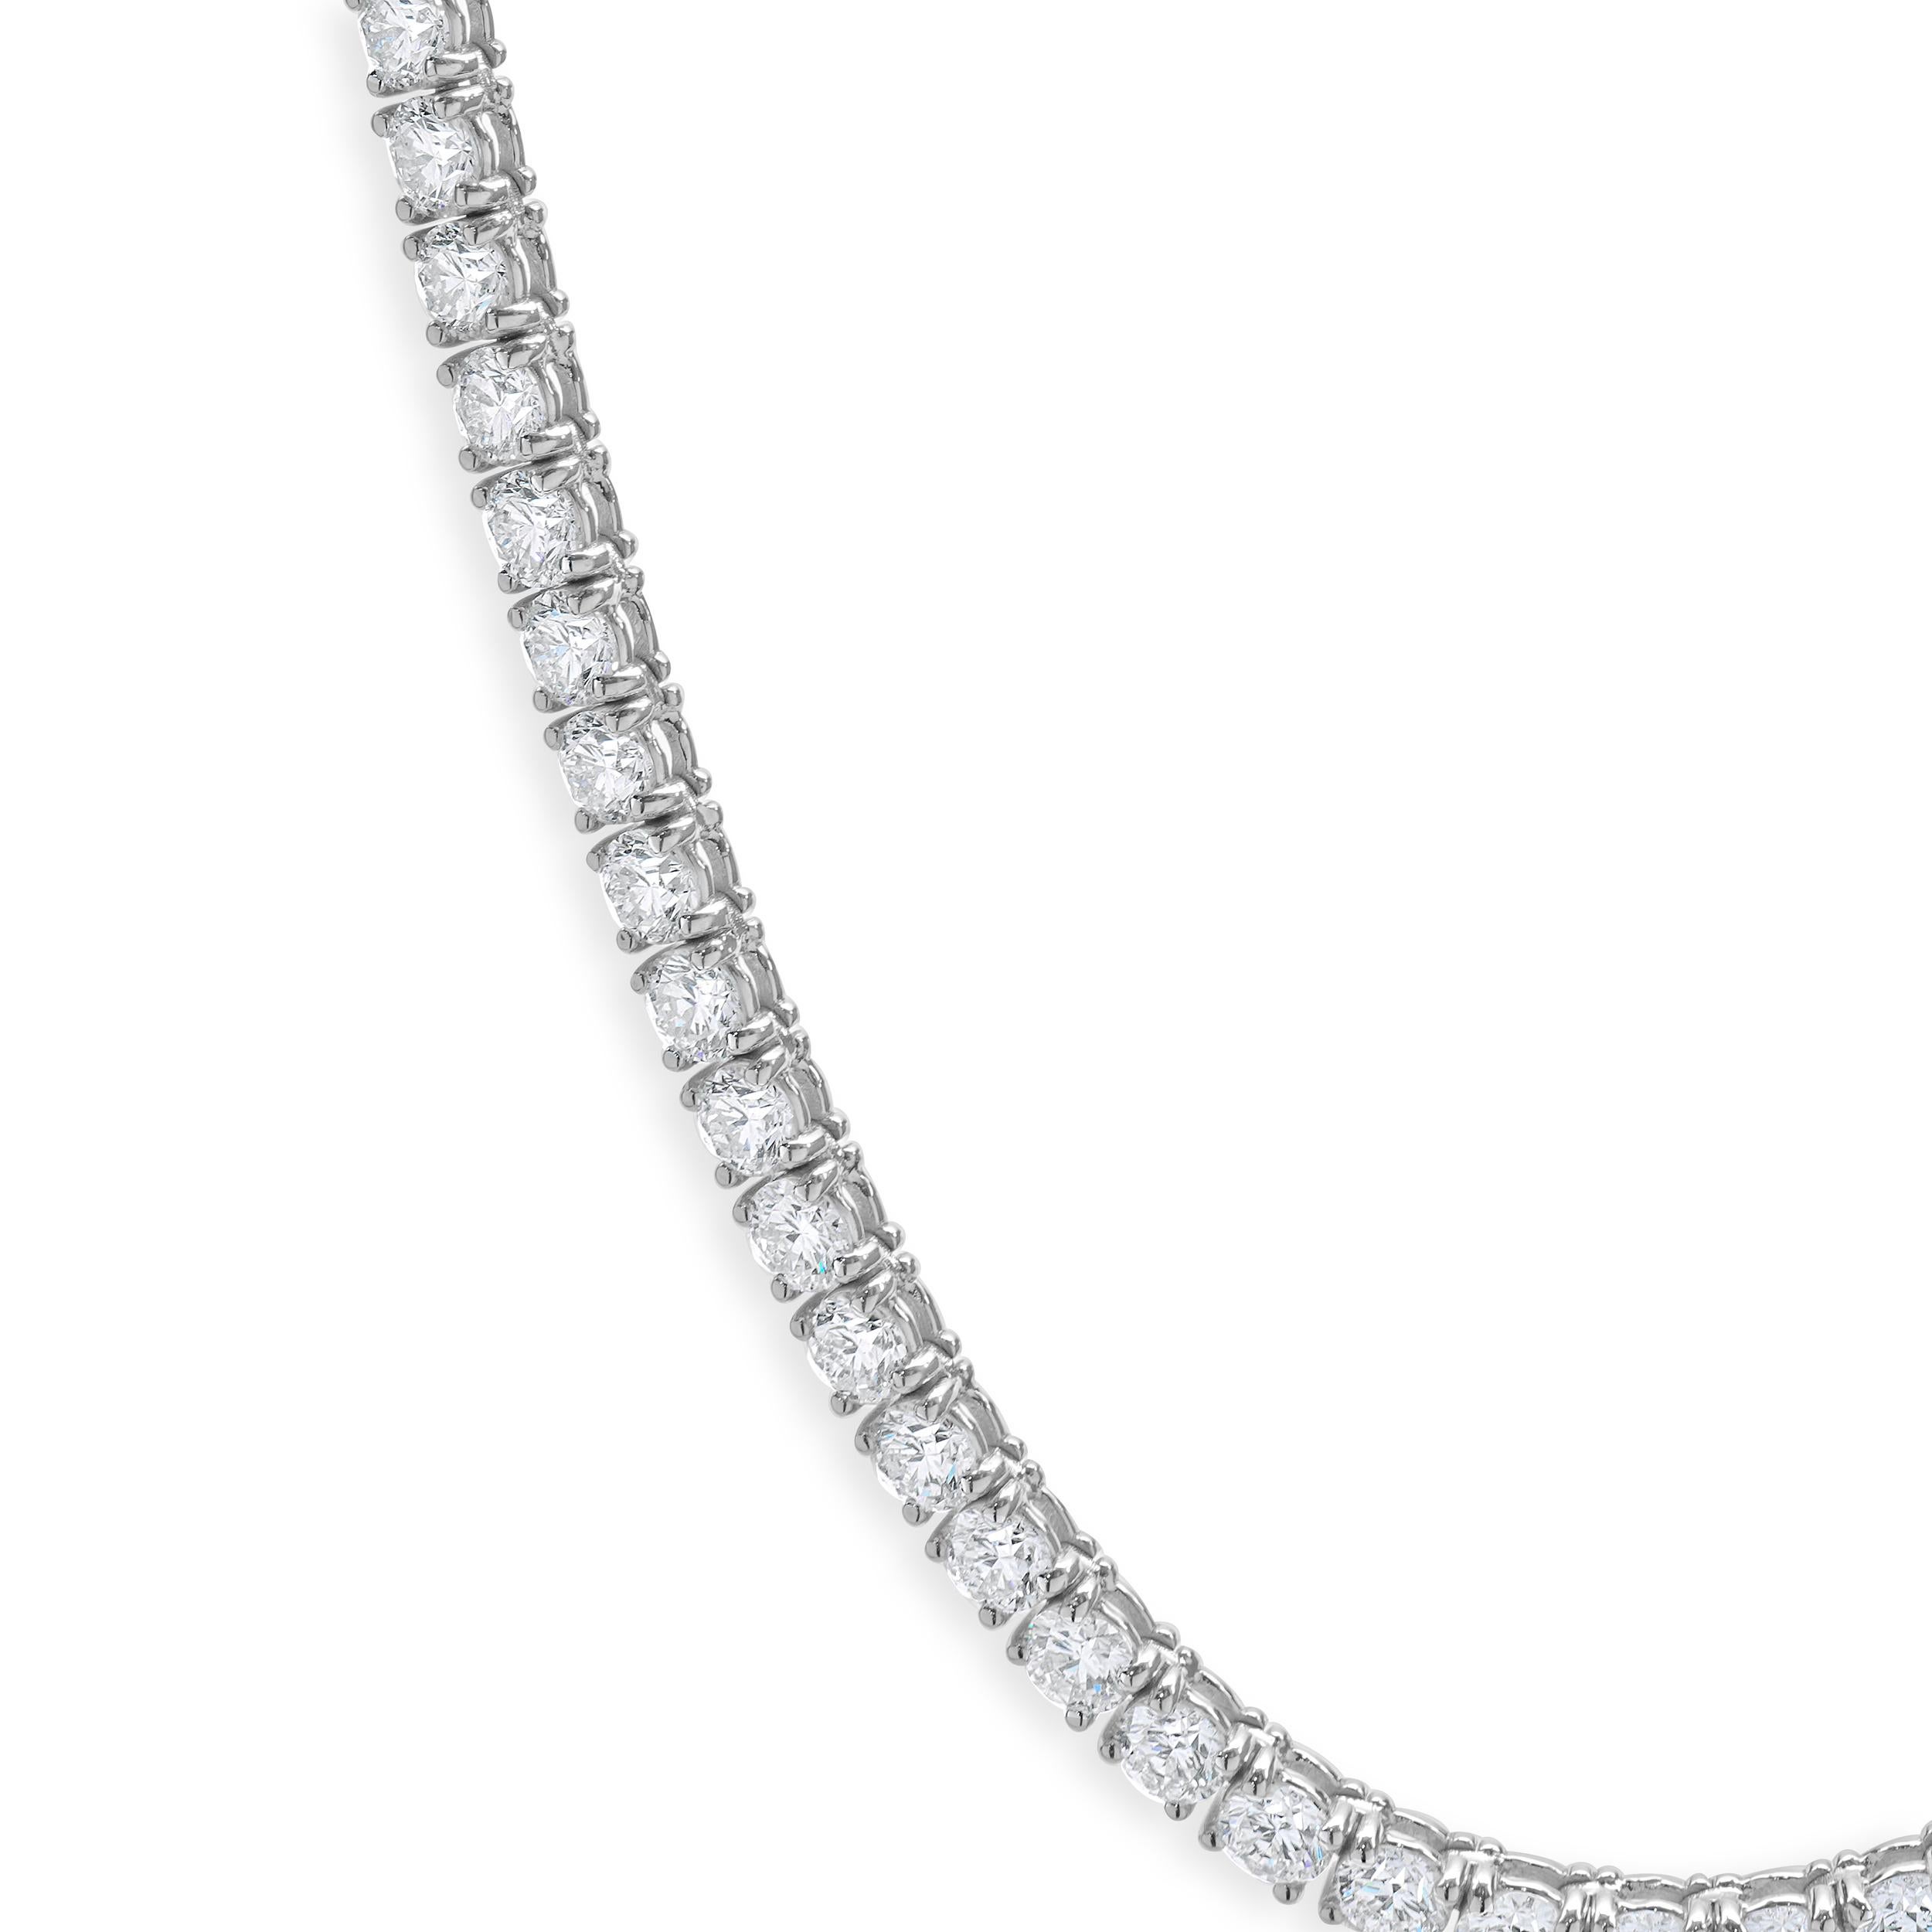 Designer: custom
Material: 14K white gold
Diamonds: round brilliant cut = 18.96ct
Color: F/G
Clarity: SI1-2
Dimensions: necklace measures 16-inches in length
Weight: 22.13 grams
